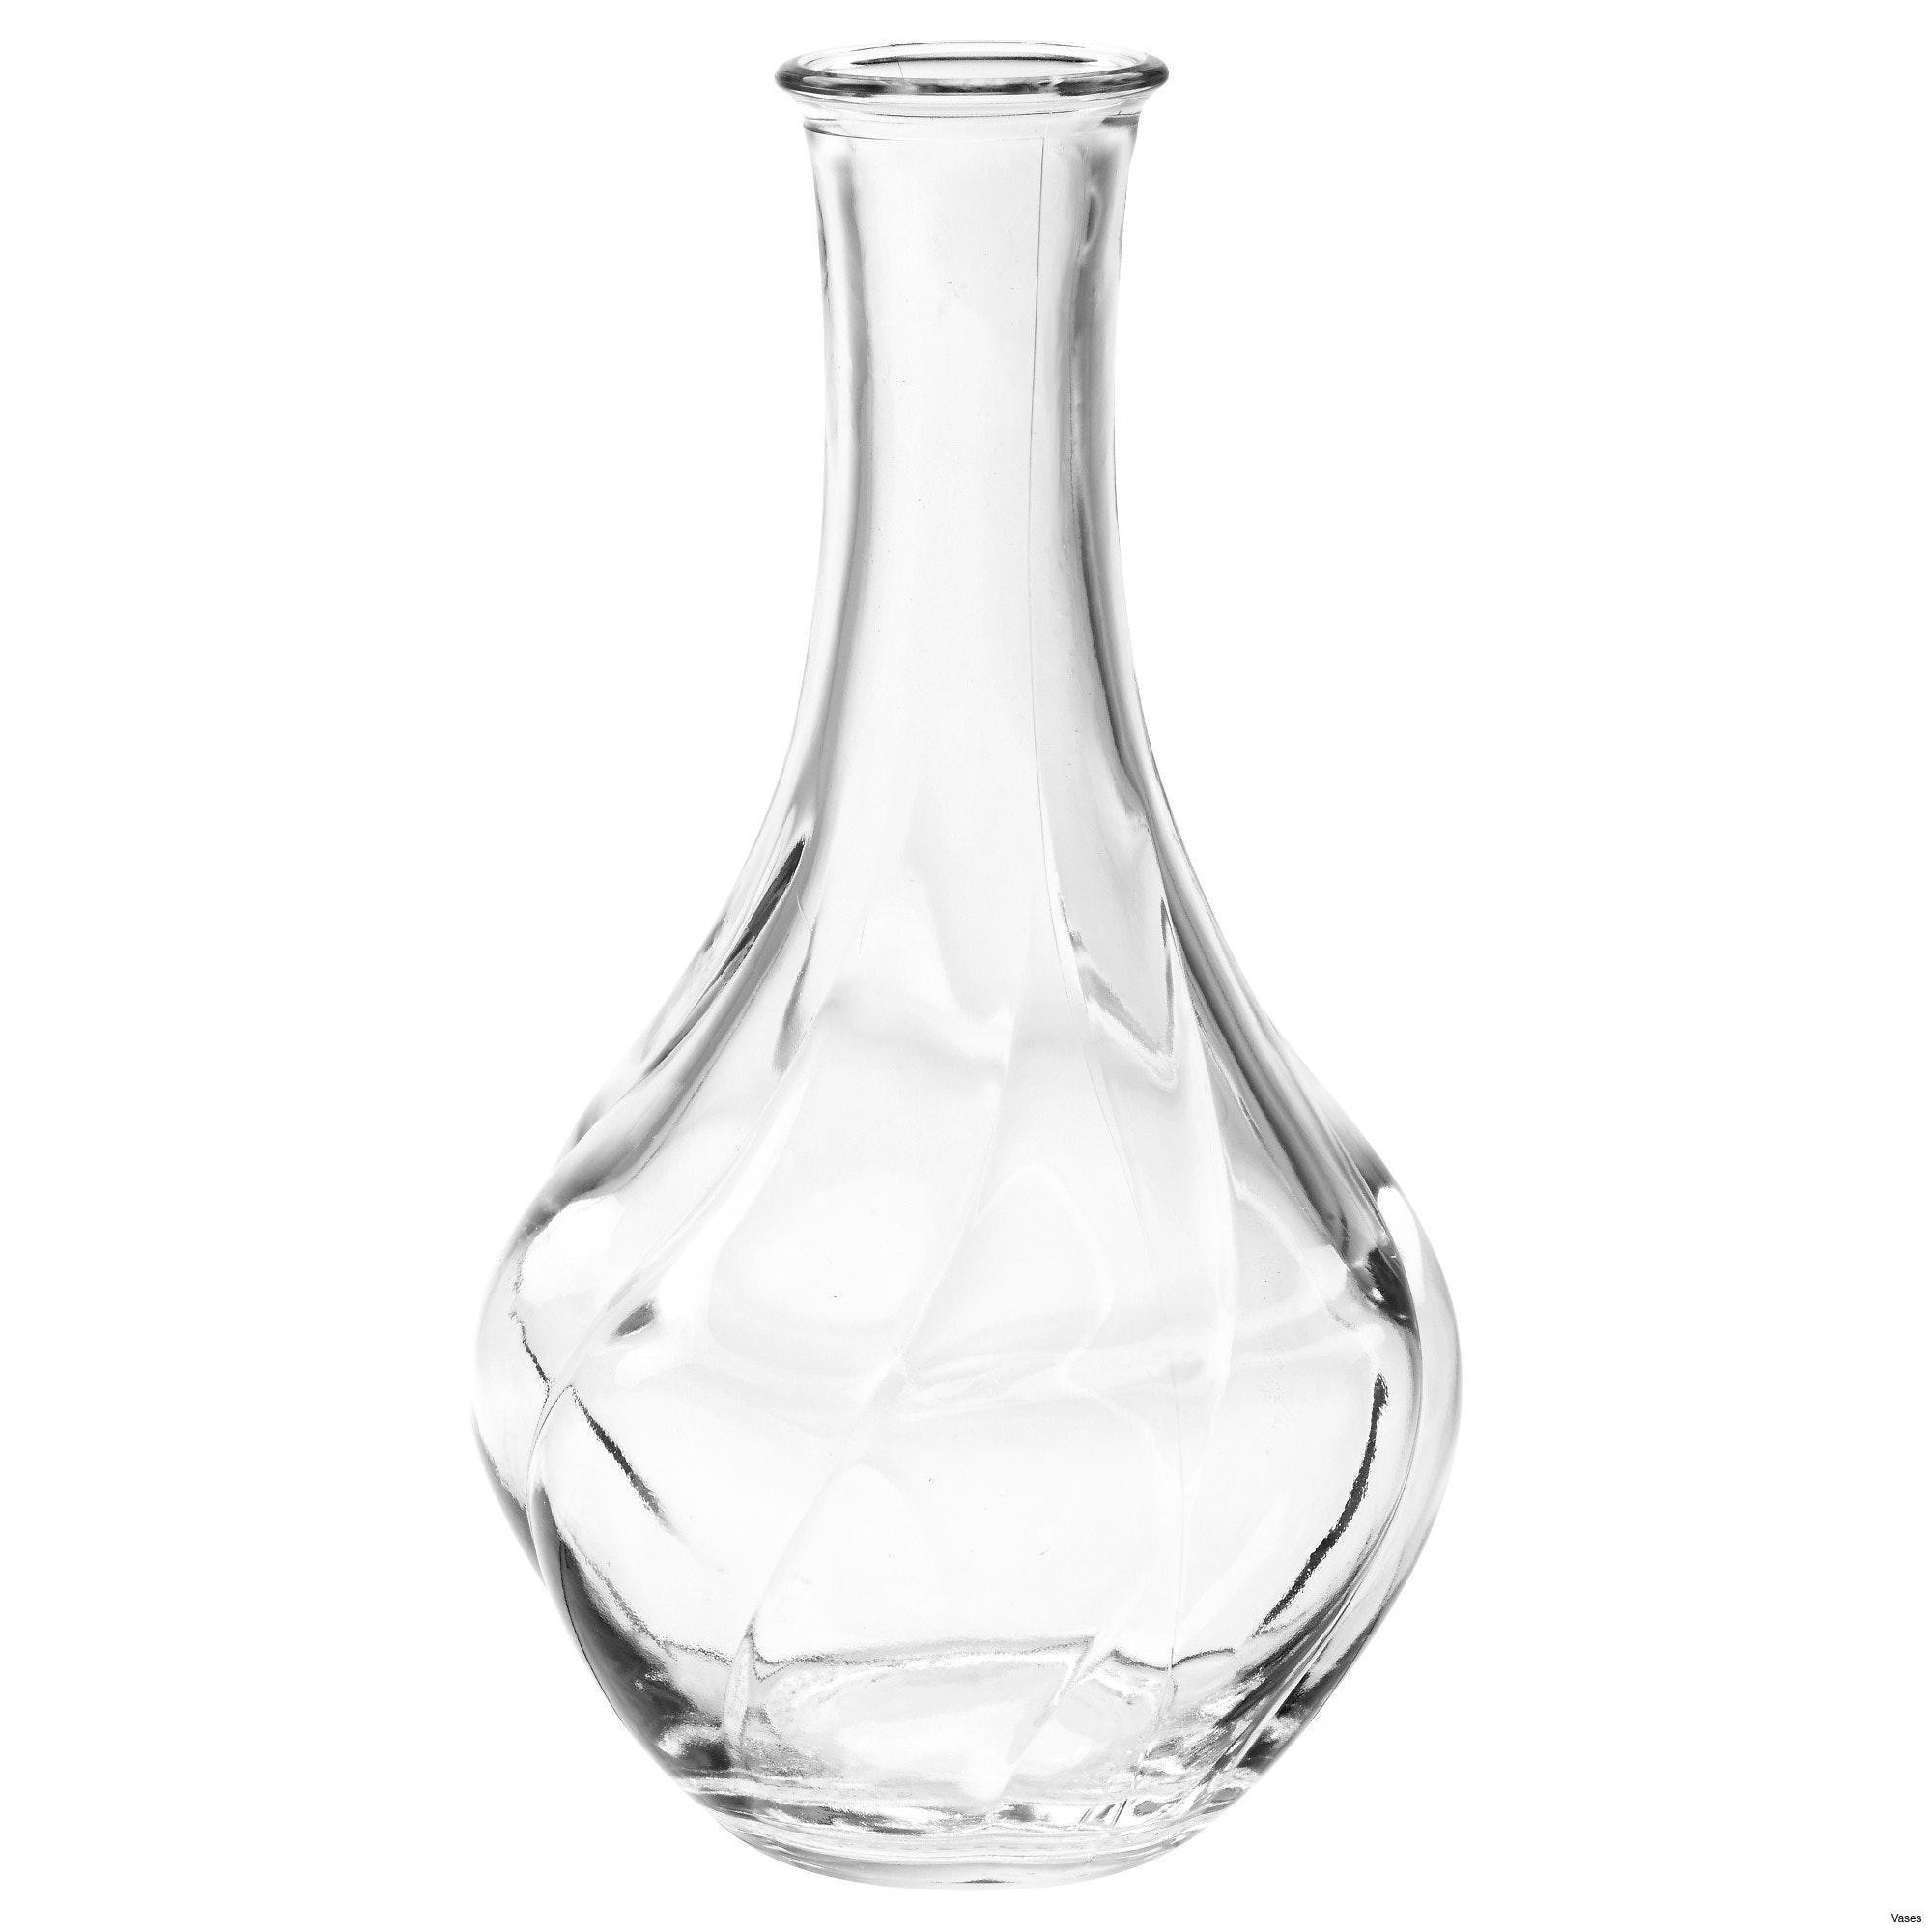 amazon home decor vases of images of giant glass vase vases artificial plants collection regarding giant glass vase images living room glass vases fresh clear vase 0d tags amazing and of